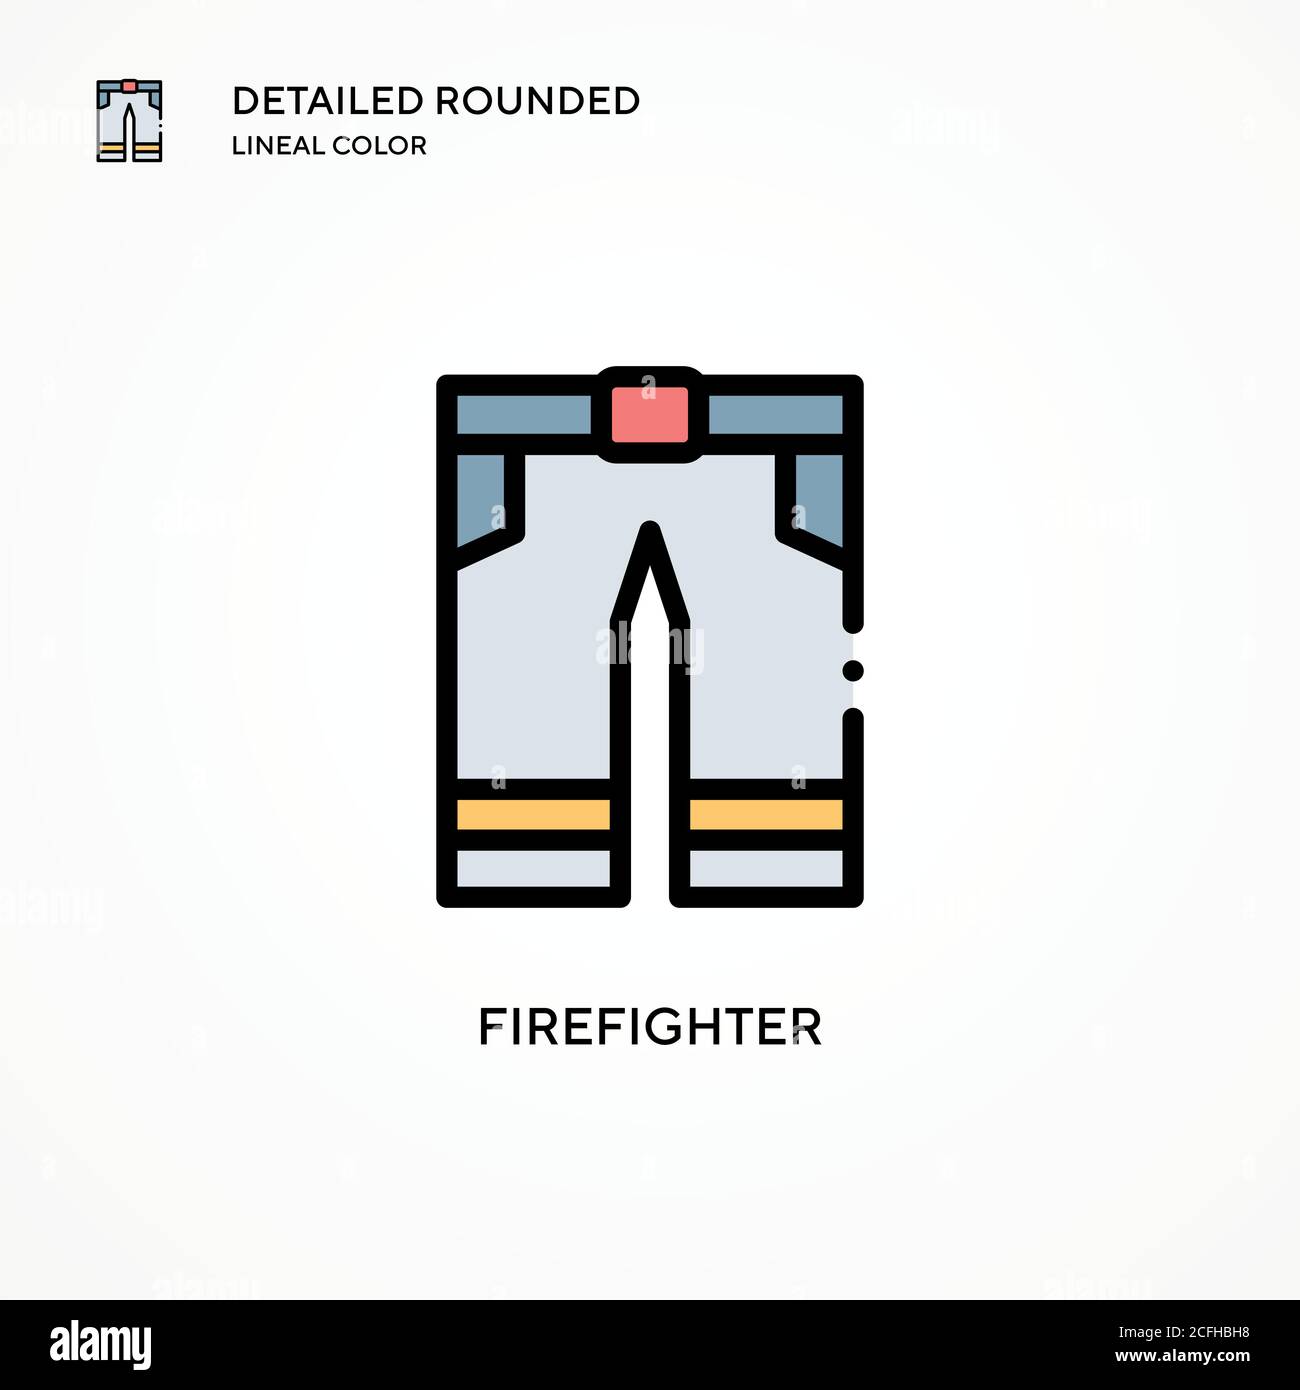 Firefighter vector icon. Modern vector illustration concepts. Easy to edit and customize. Stock Vector